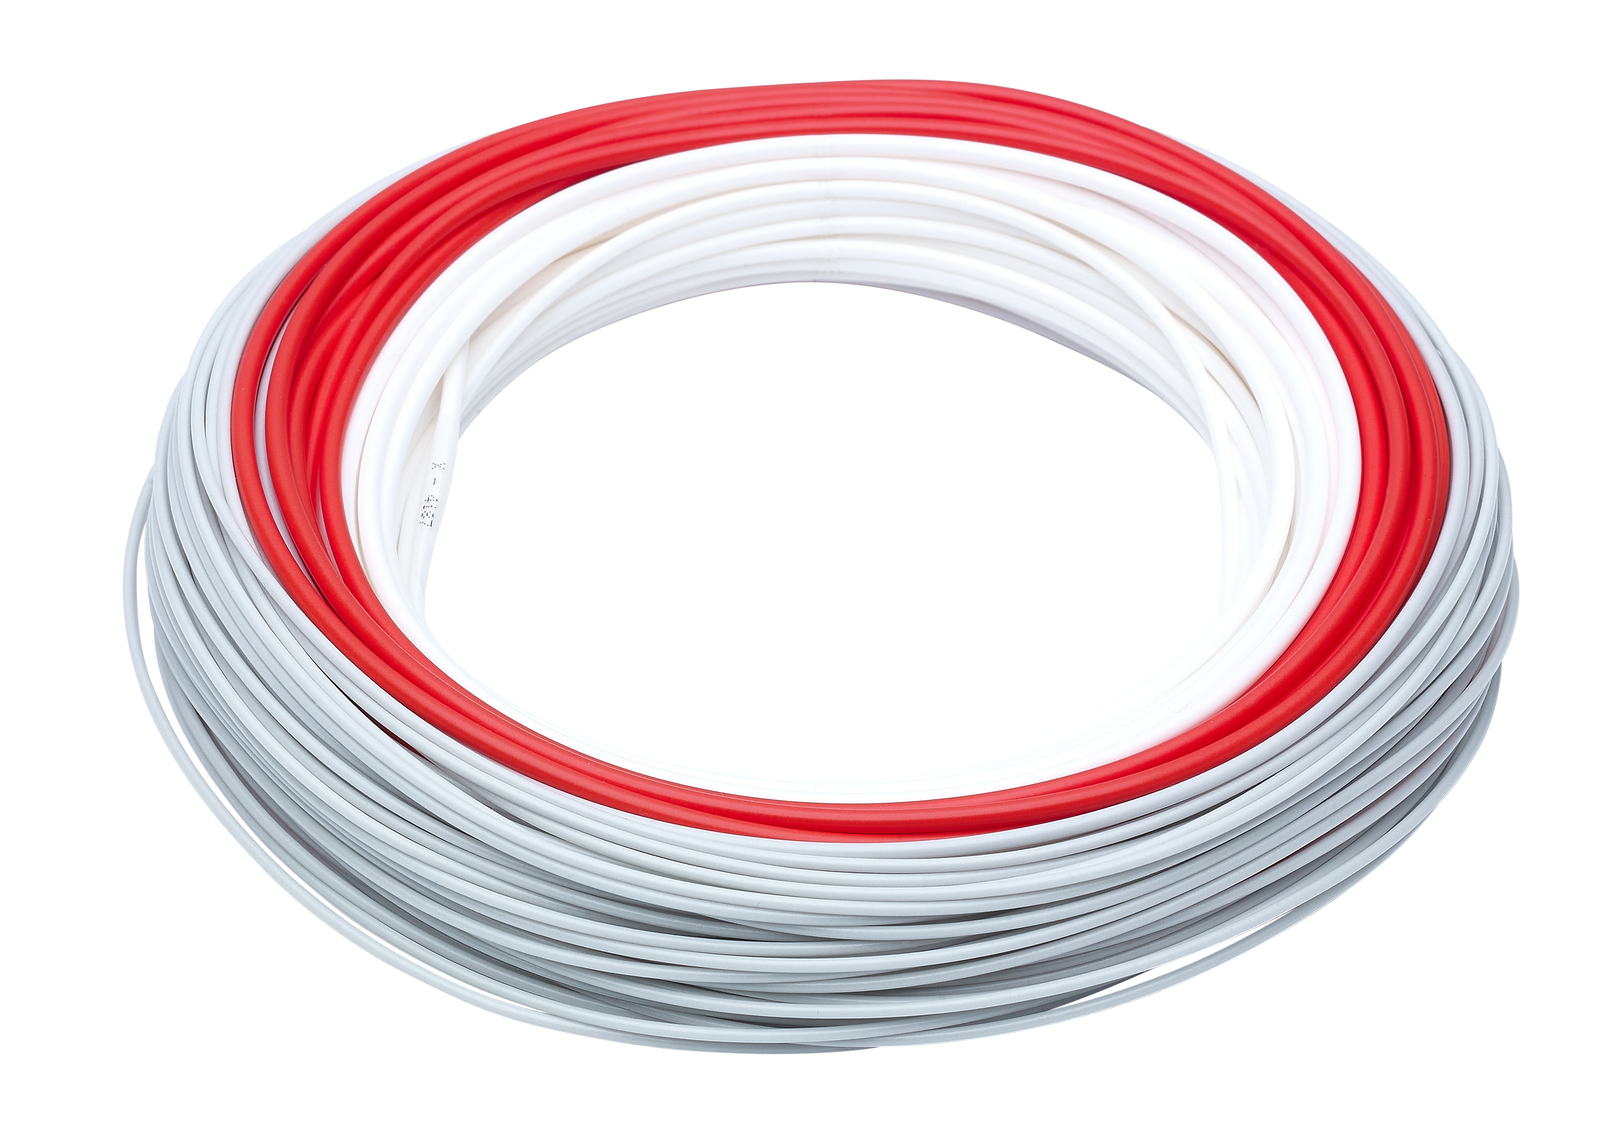 Rio Freshwater Specialty Series Elite Switch Indicator Fly Line · Shooting · 6wt · Floating · White - Red - Gray